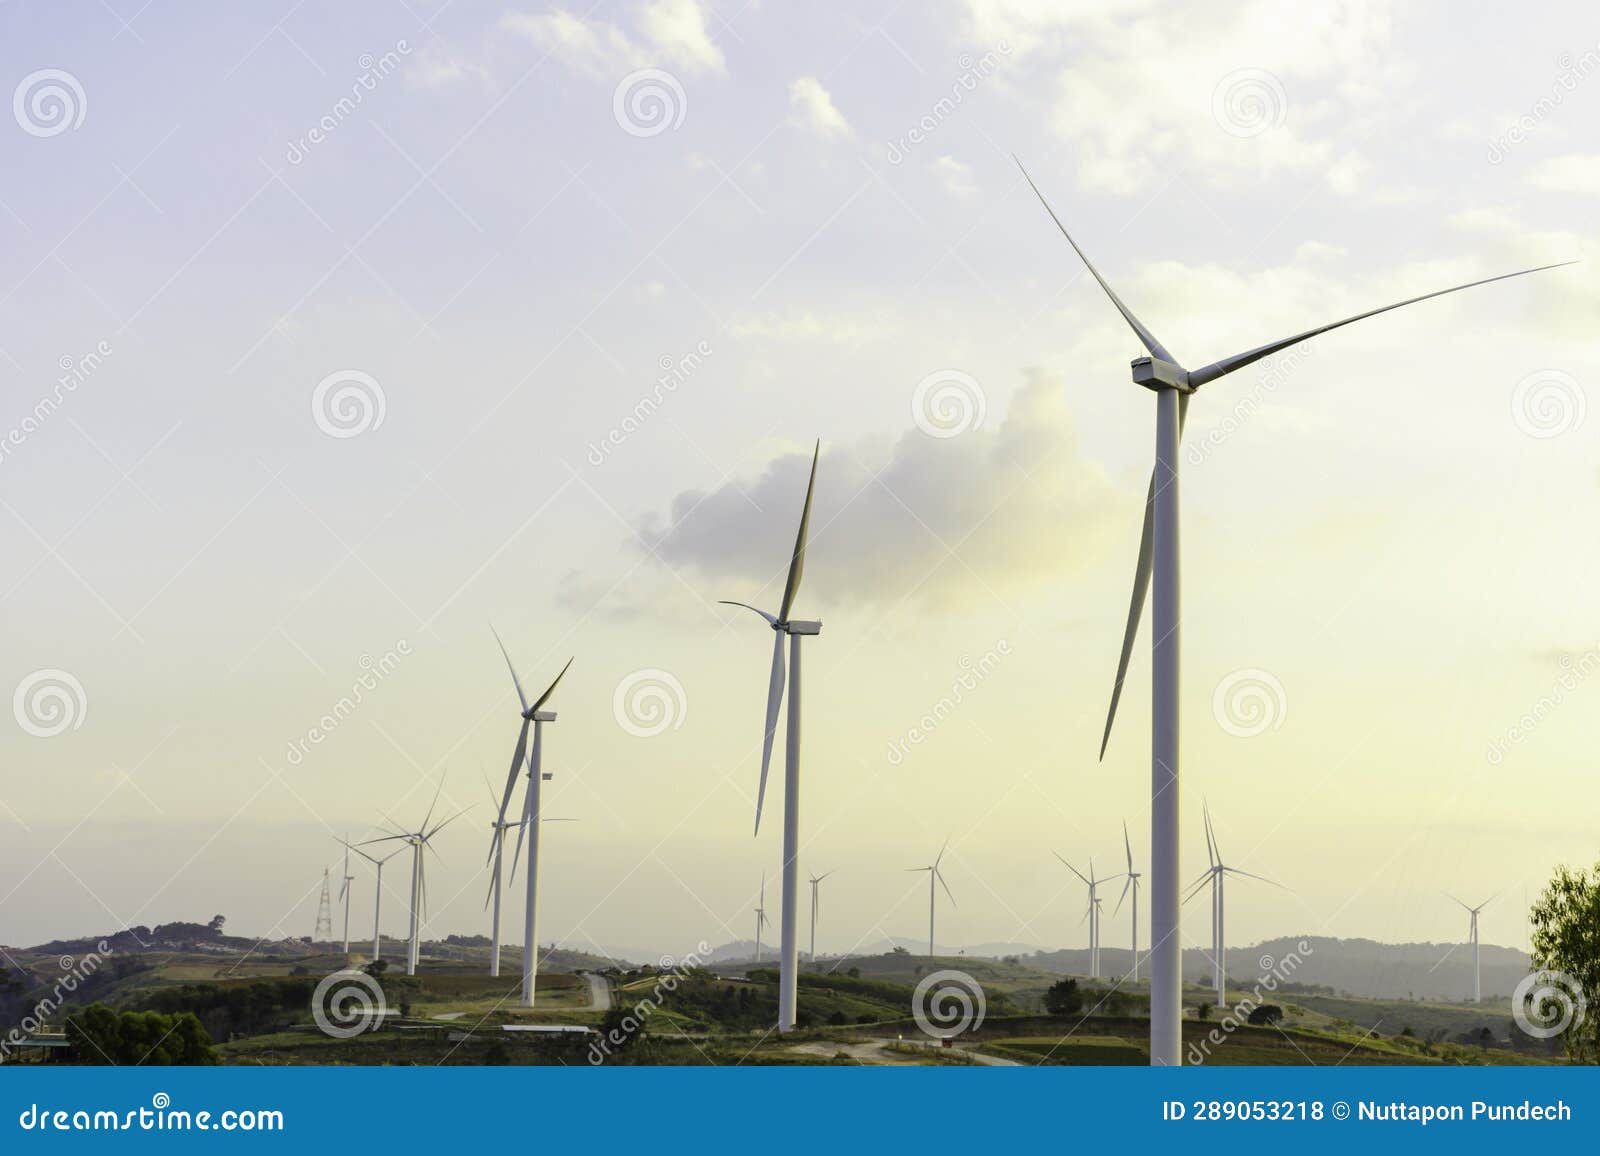 windmill turbine farm for electricity generation on landscape mountain at sunset sky